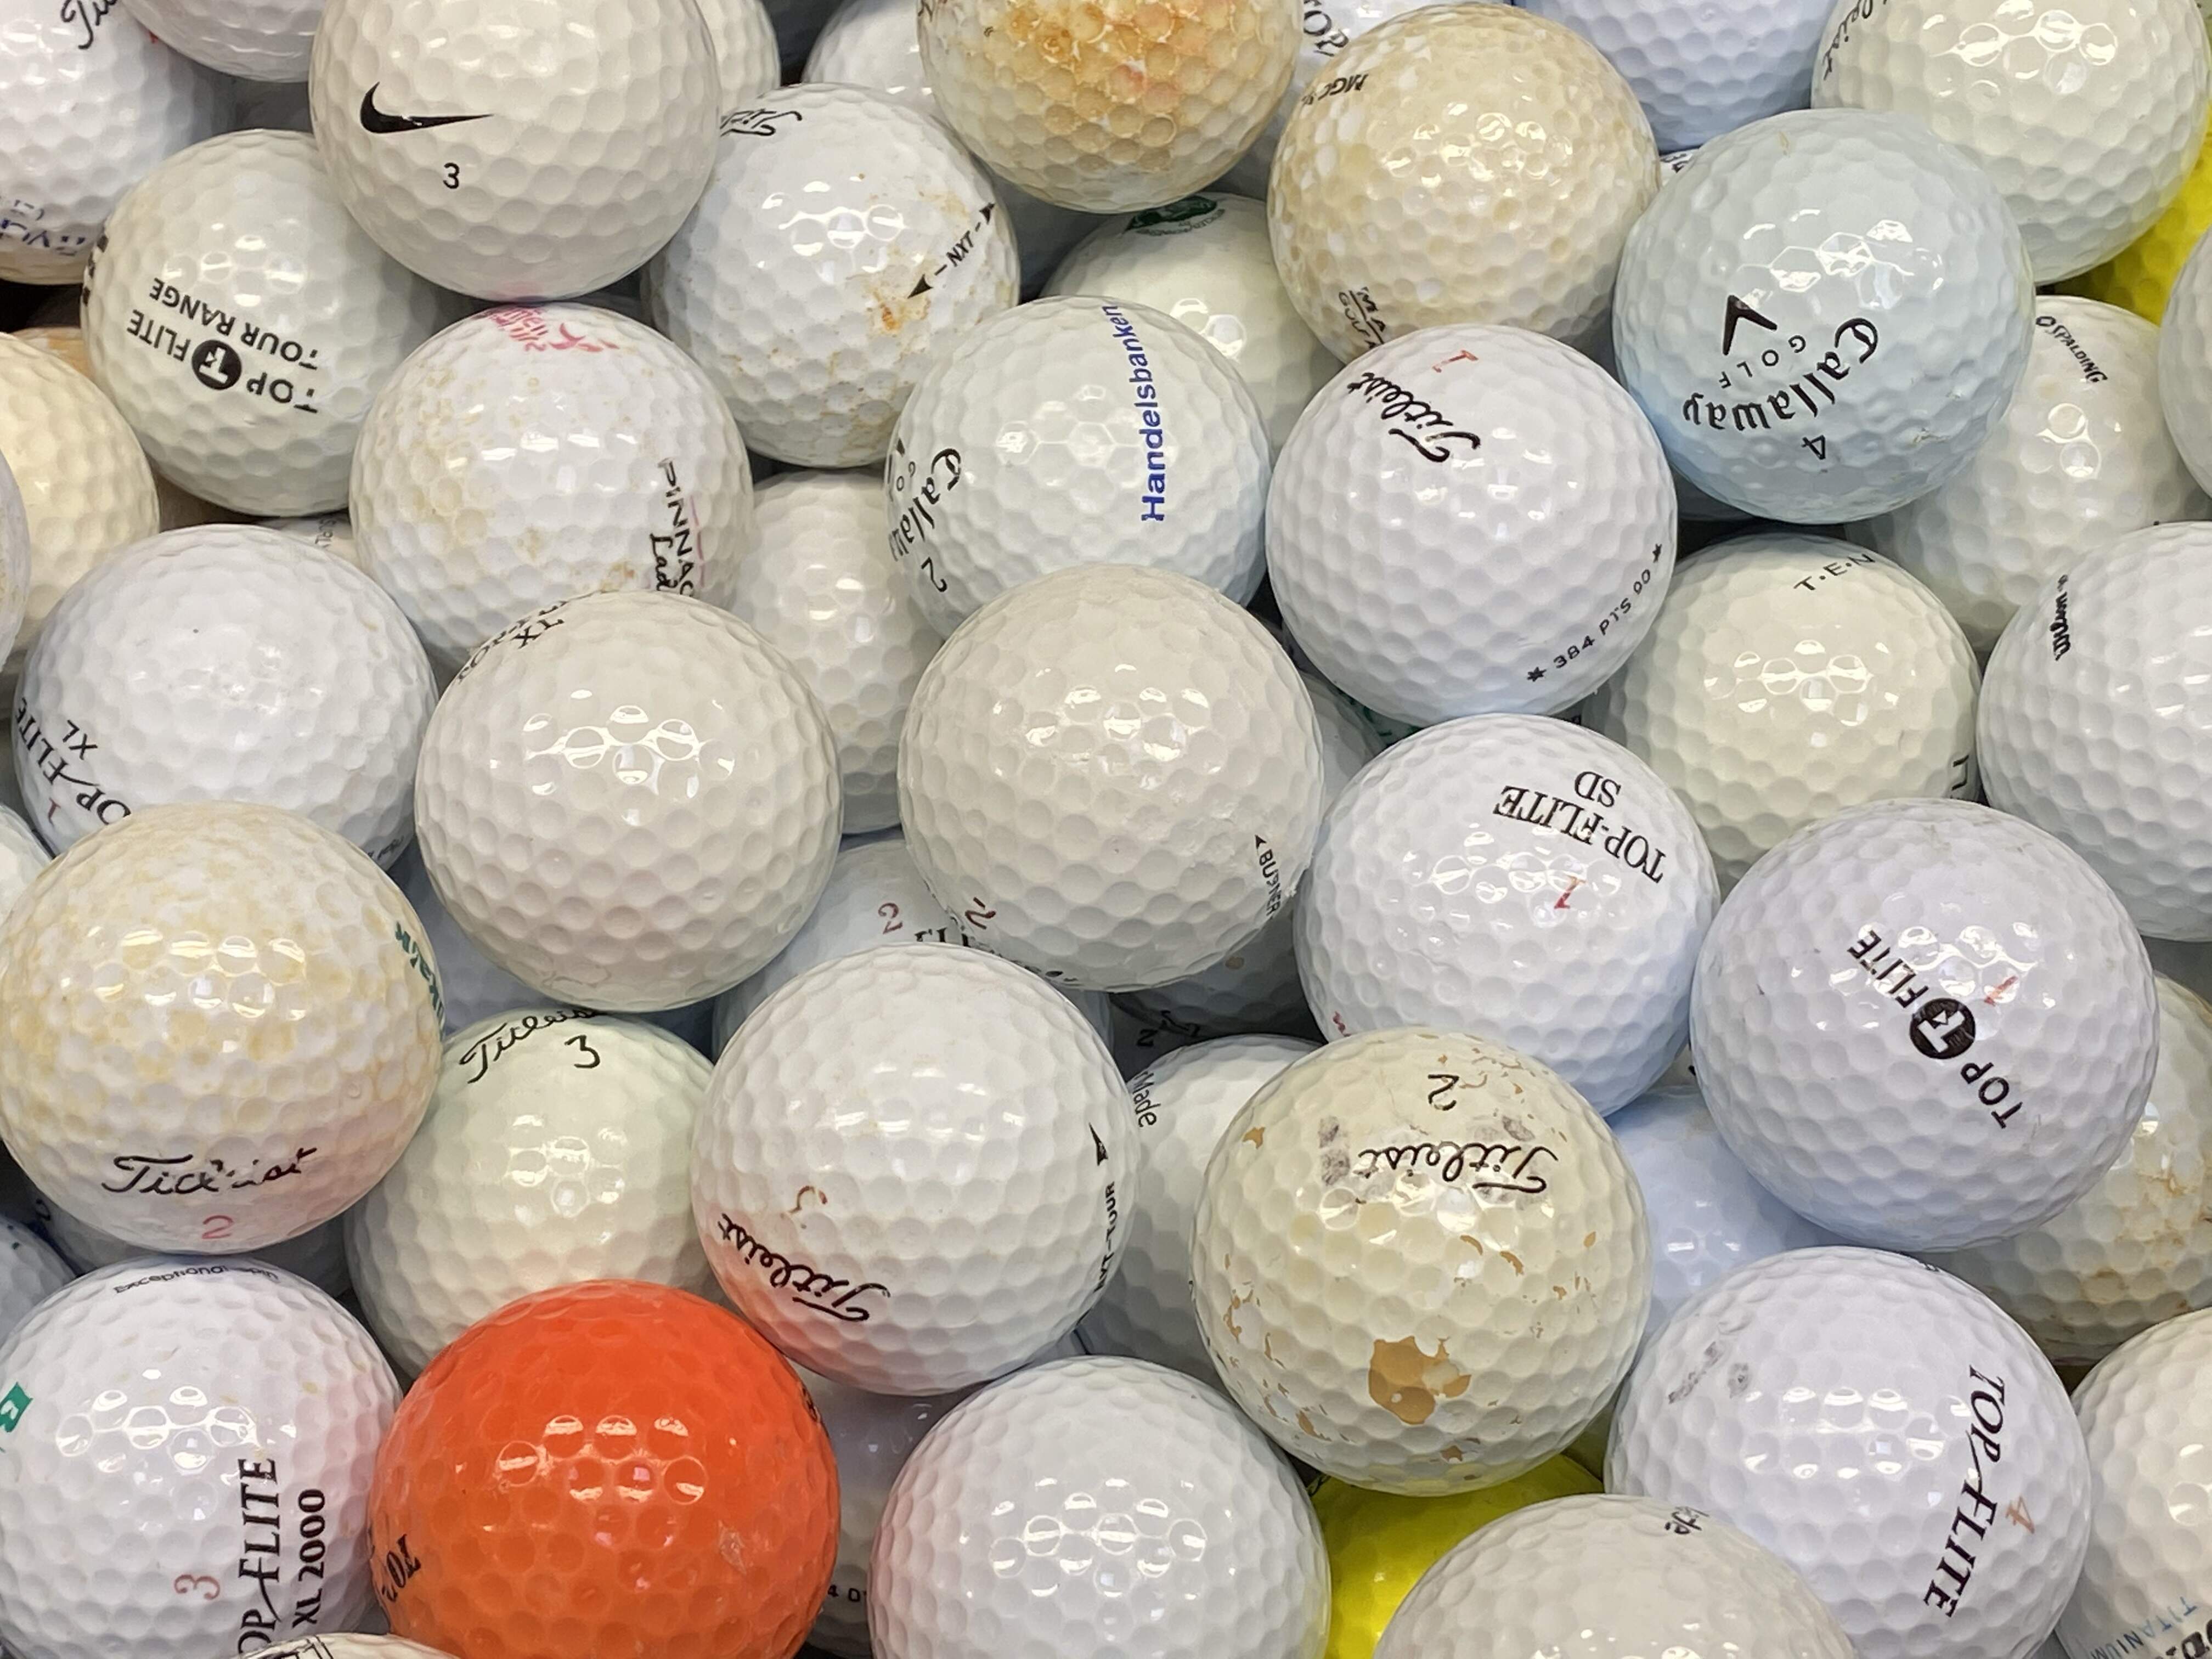 Golf Balls l Used golf balls from divers